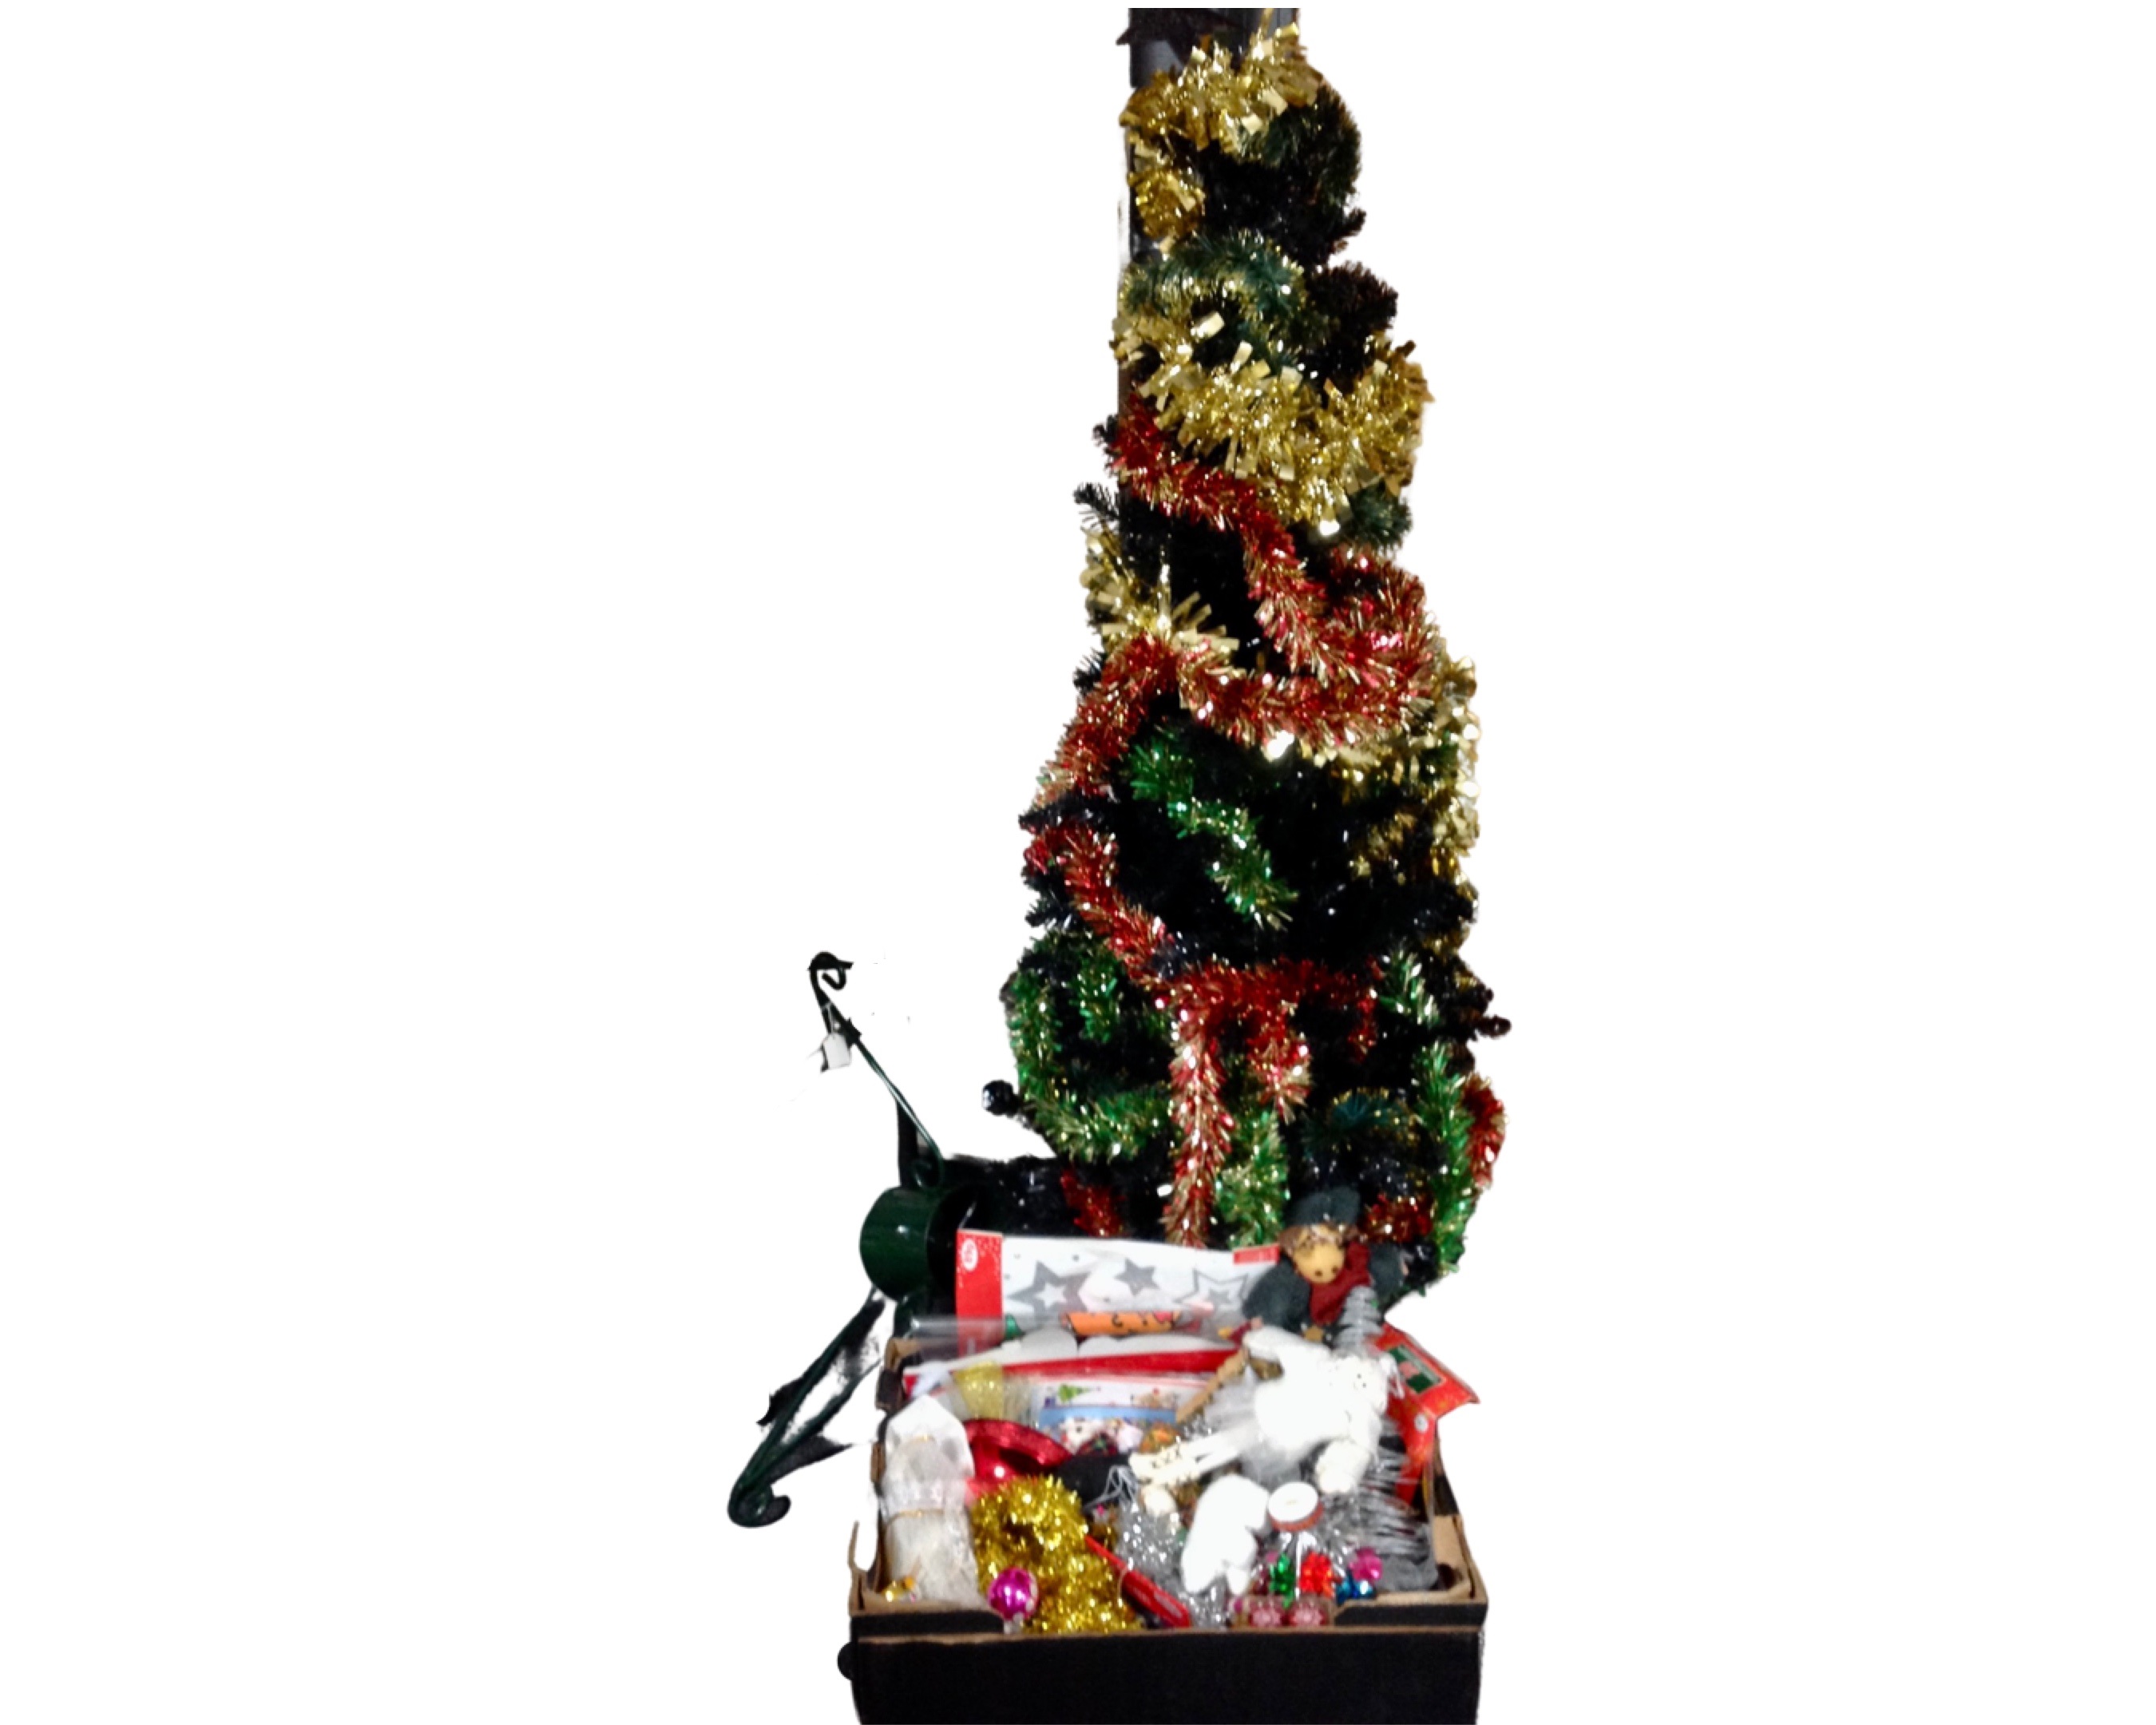 A 5' Christmas tree with tinsel together with a metal Christmas tree stand a box containing